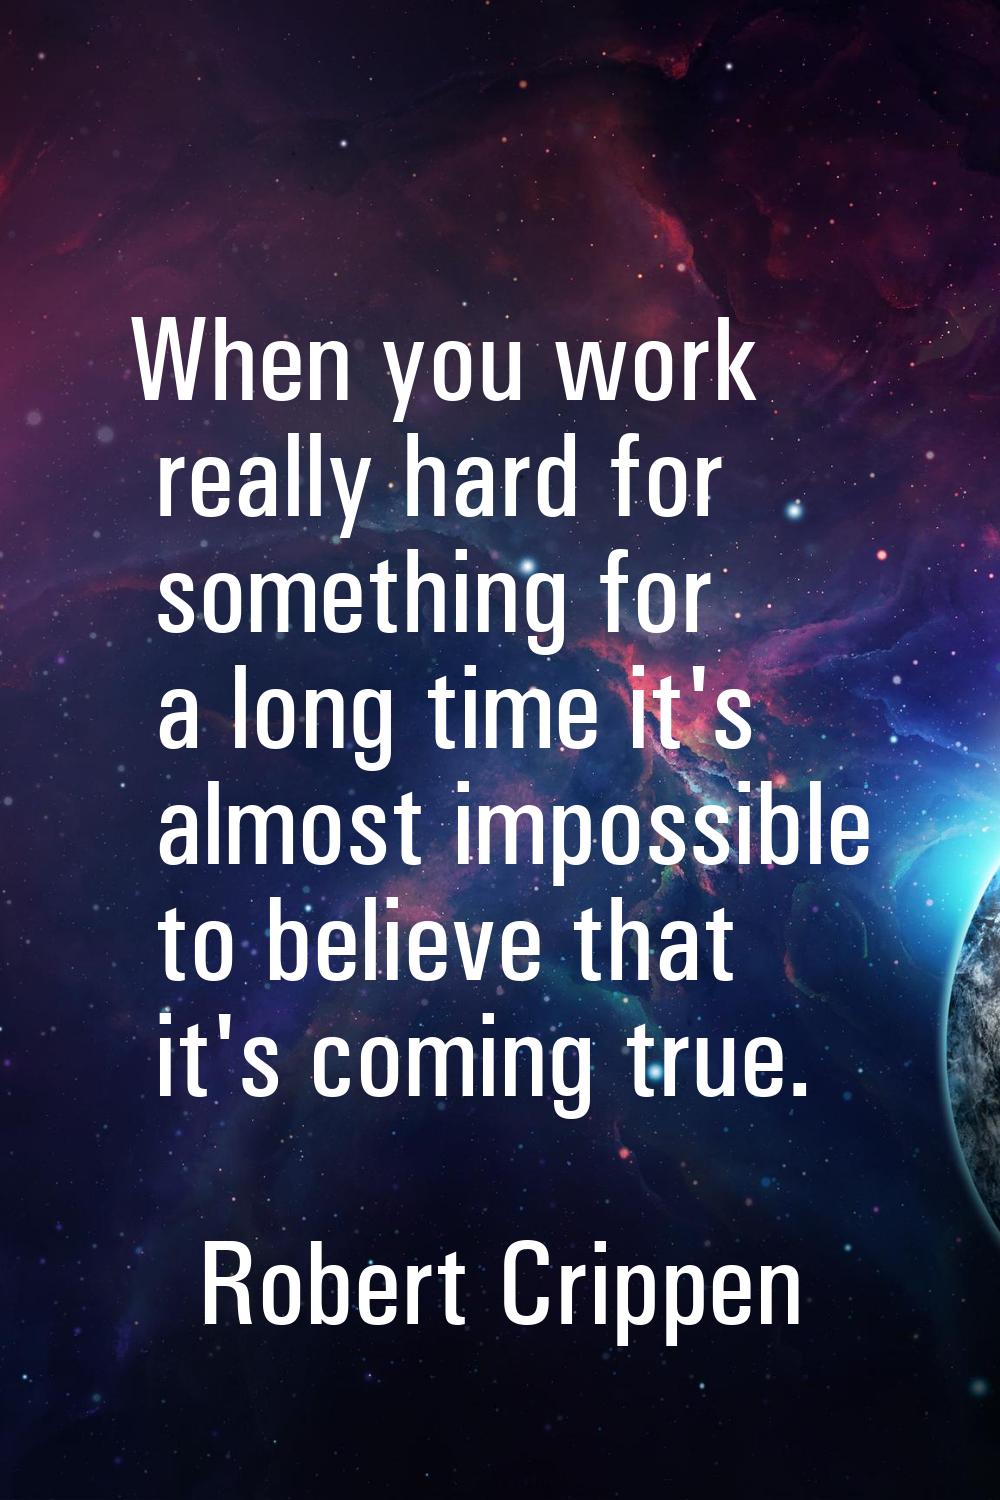 When you work really hard for something for a long time it's almost impossible to believe that it's